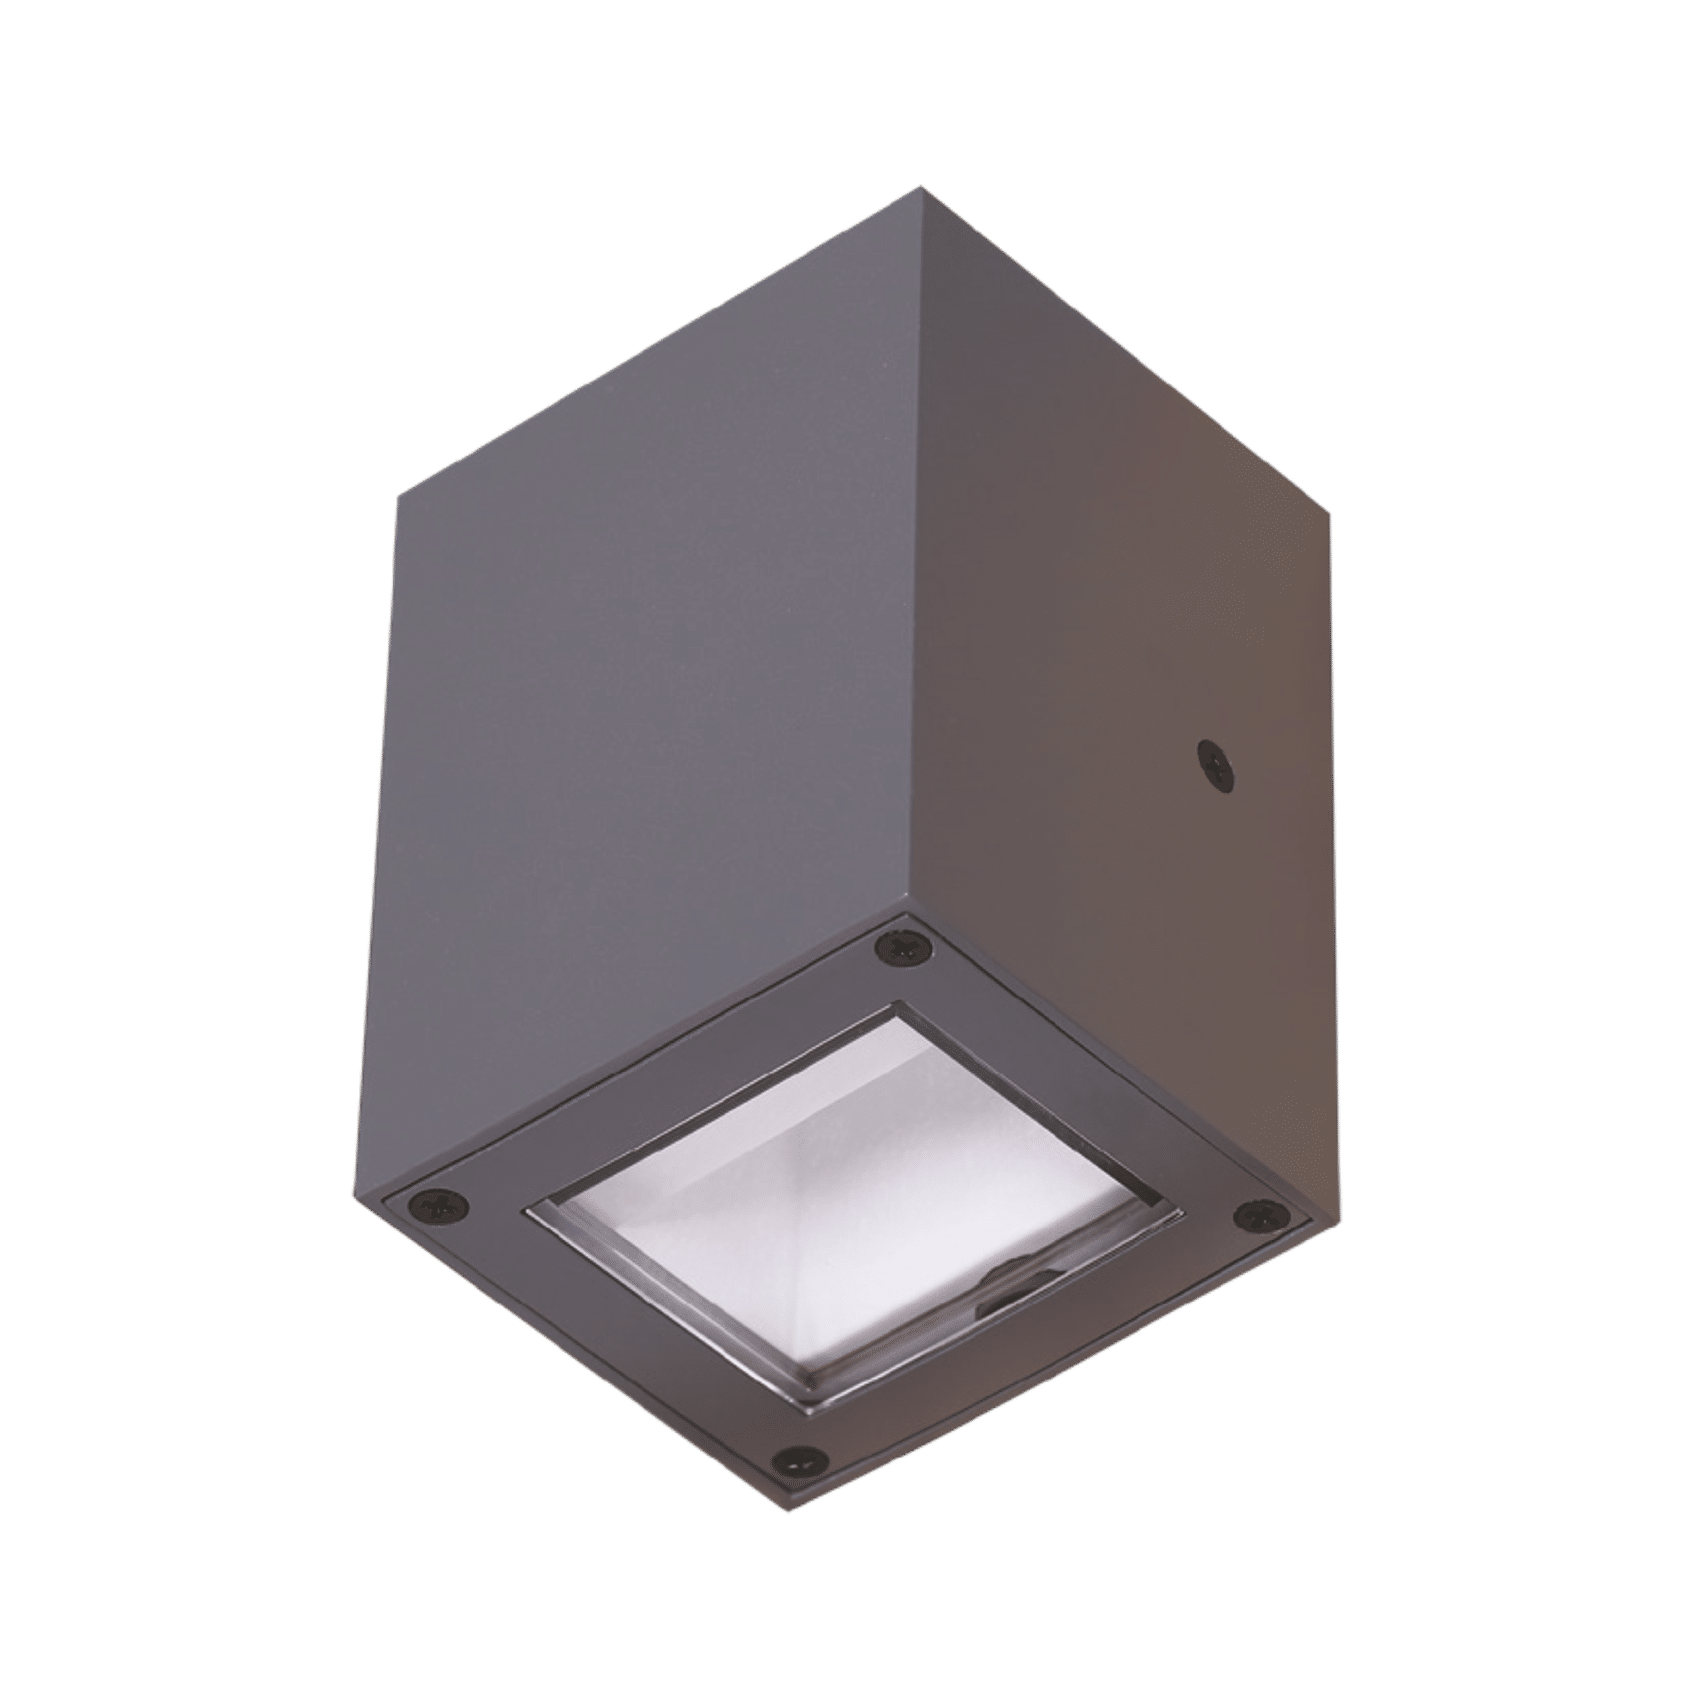 LED Wall Mounted Light - EST-D7AC0237